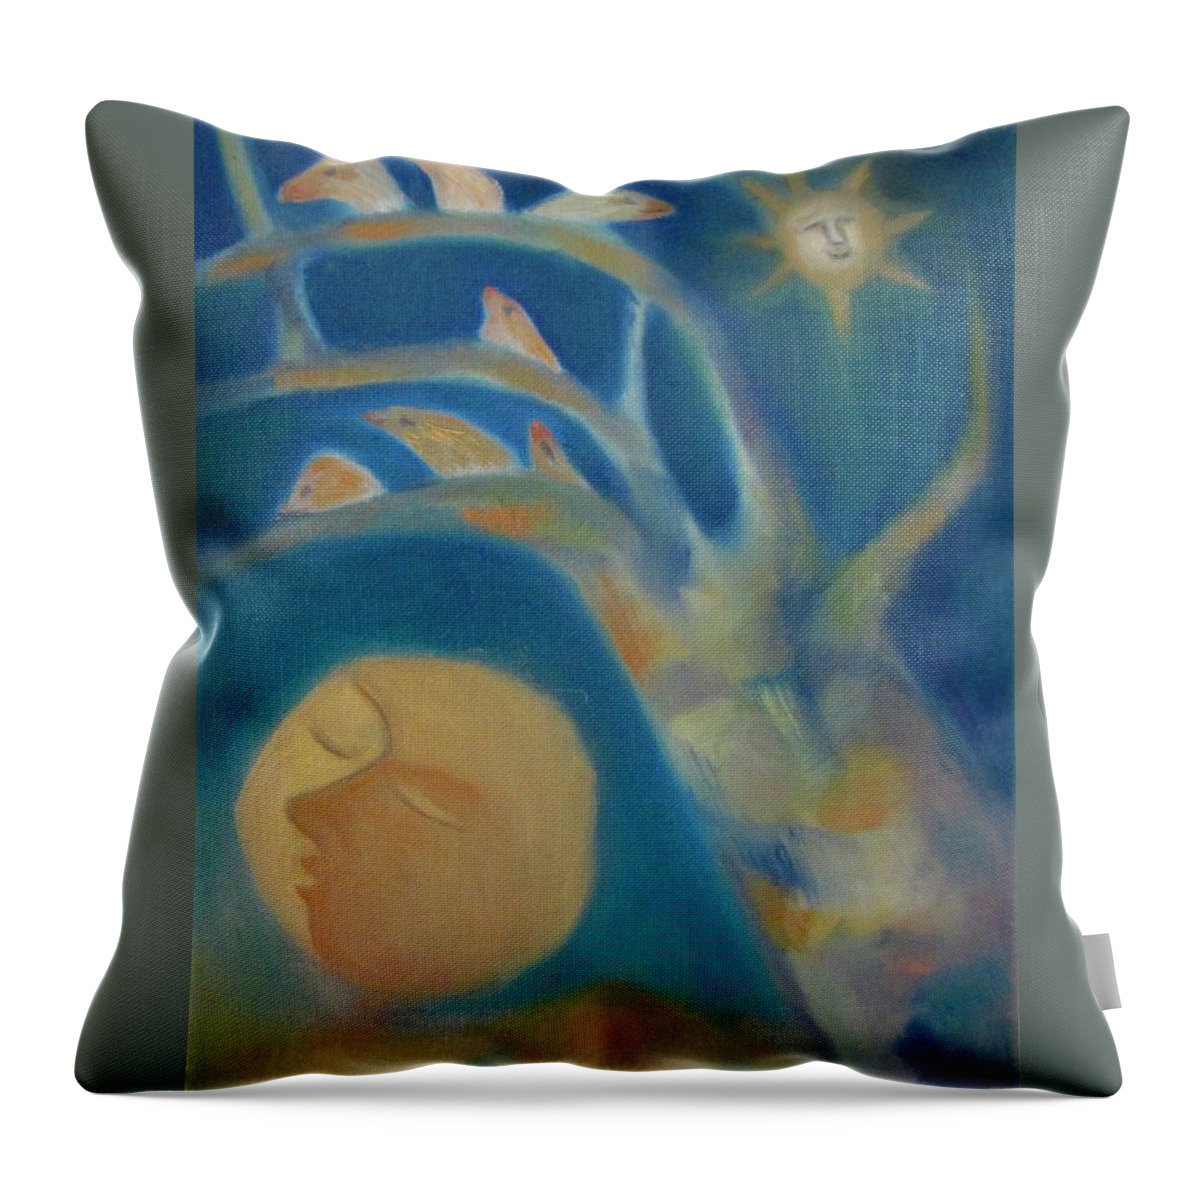 Oil Painting Throw Pillow featuring the painting The Bird Tree by Suzy Norris